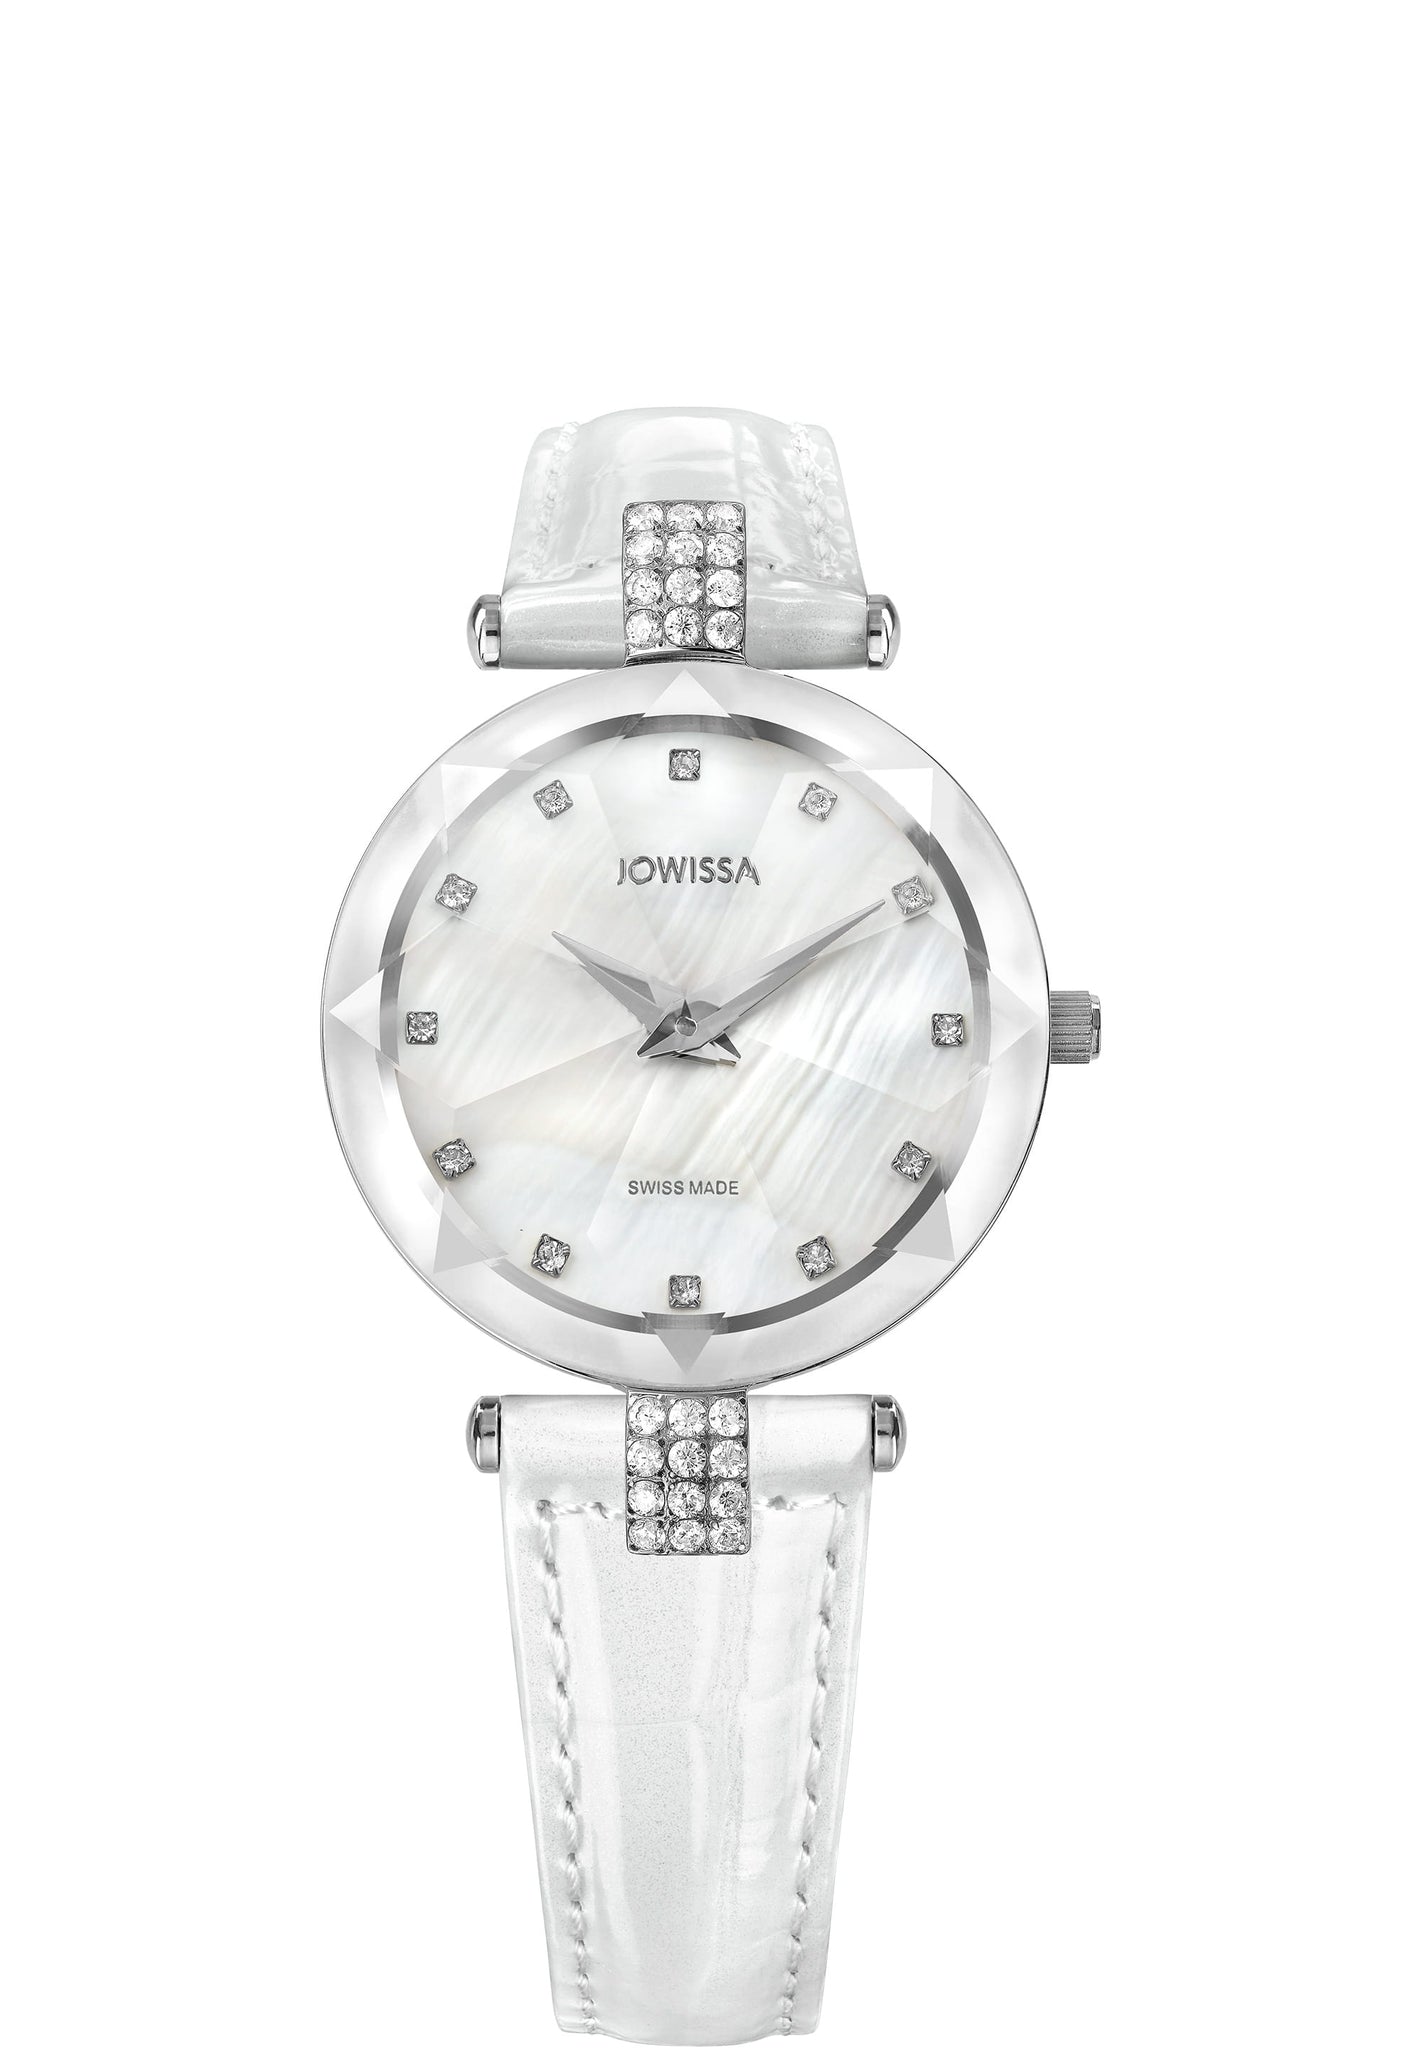 Facet Strass Reloj Mujer Suizo J5.619.M